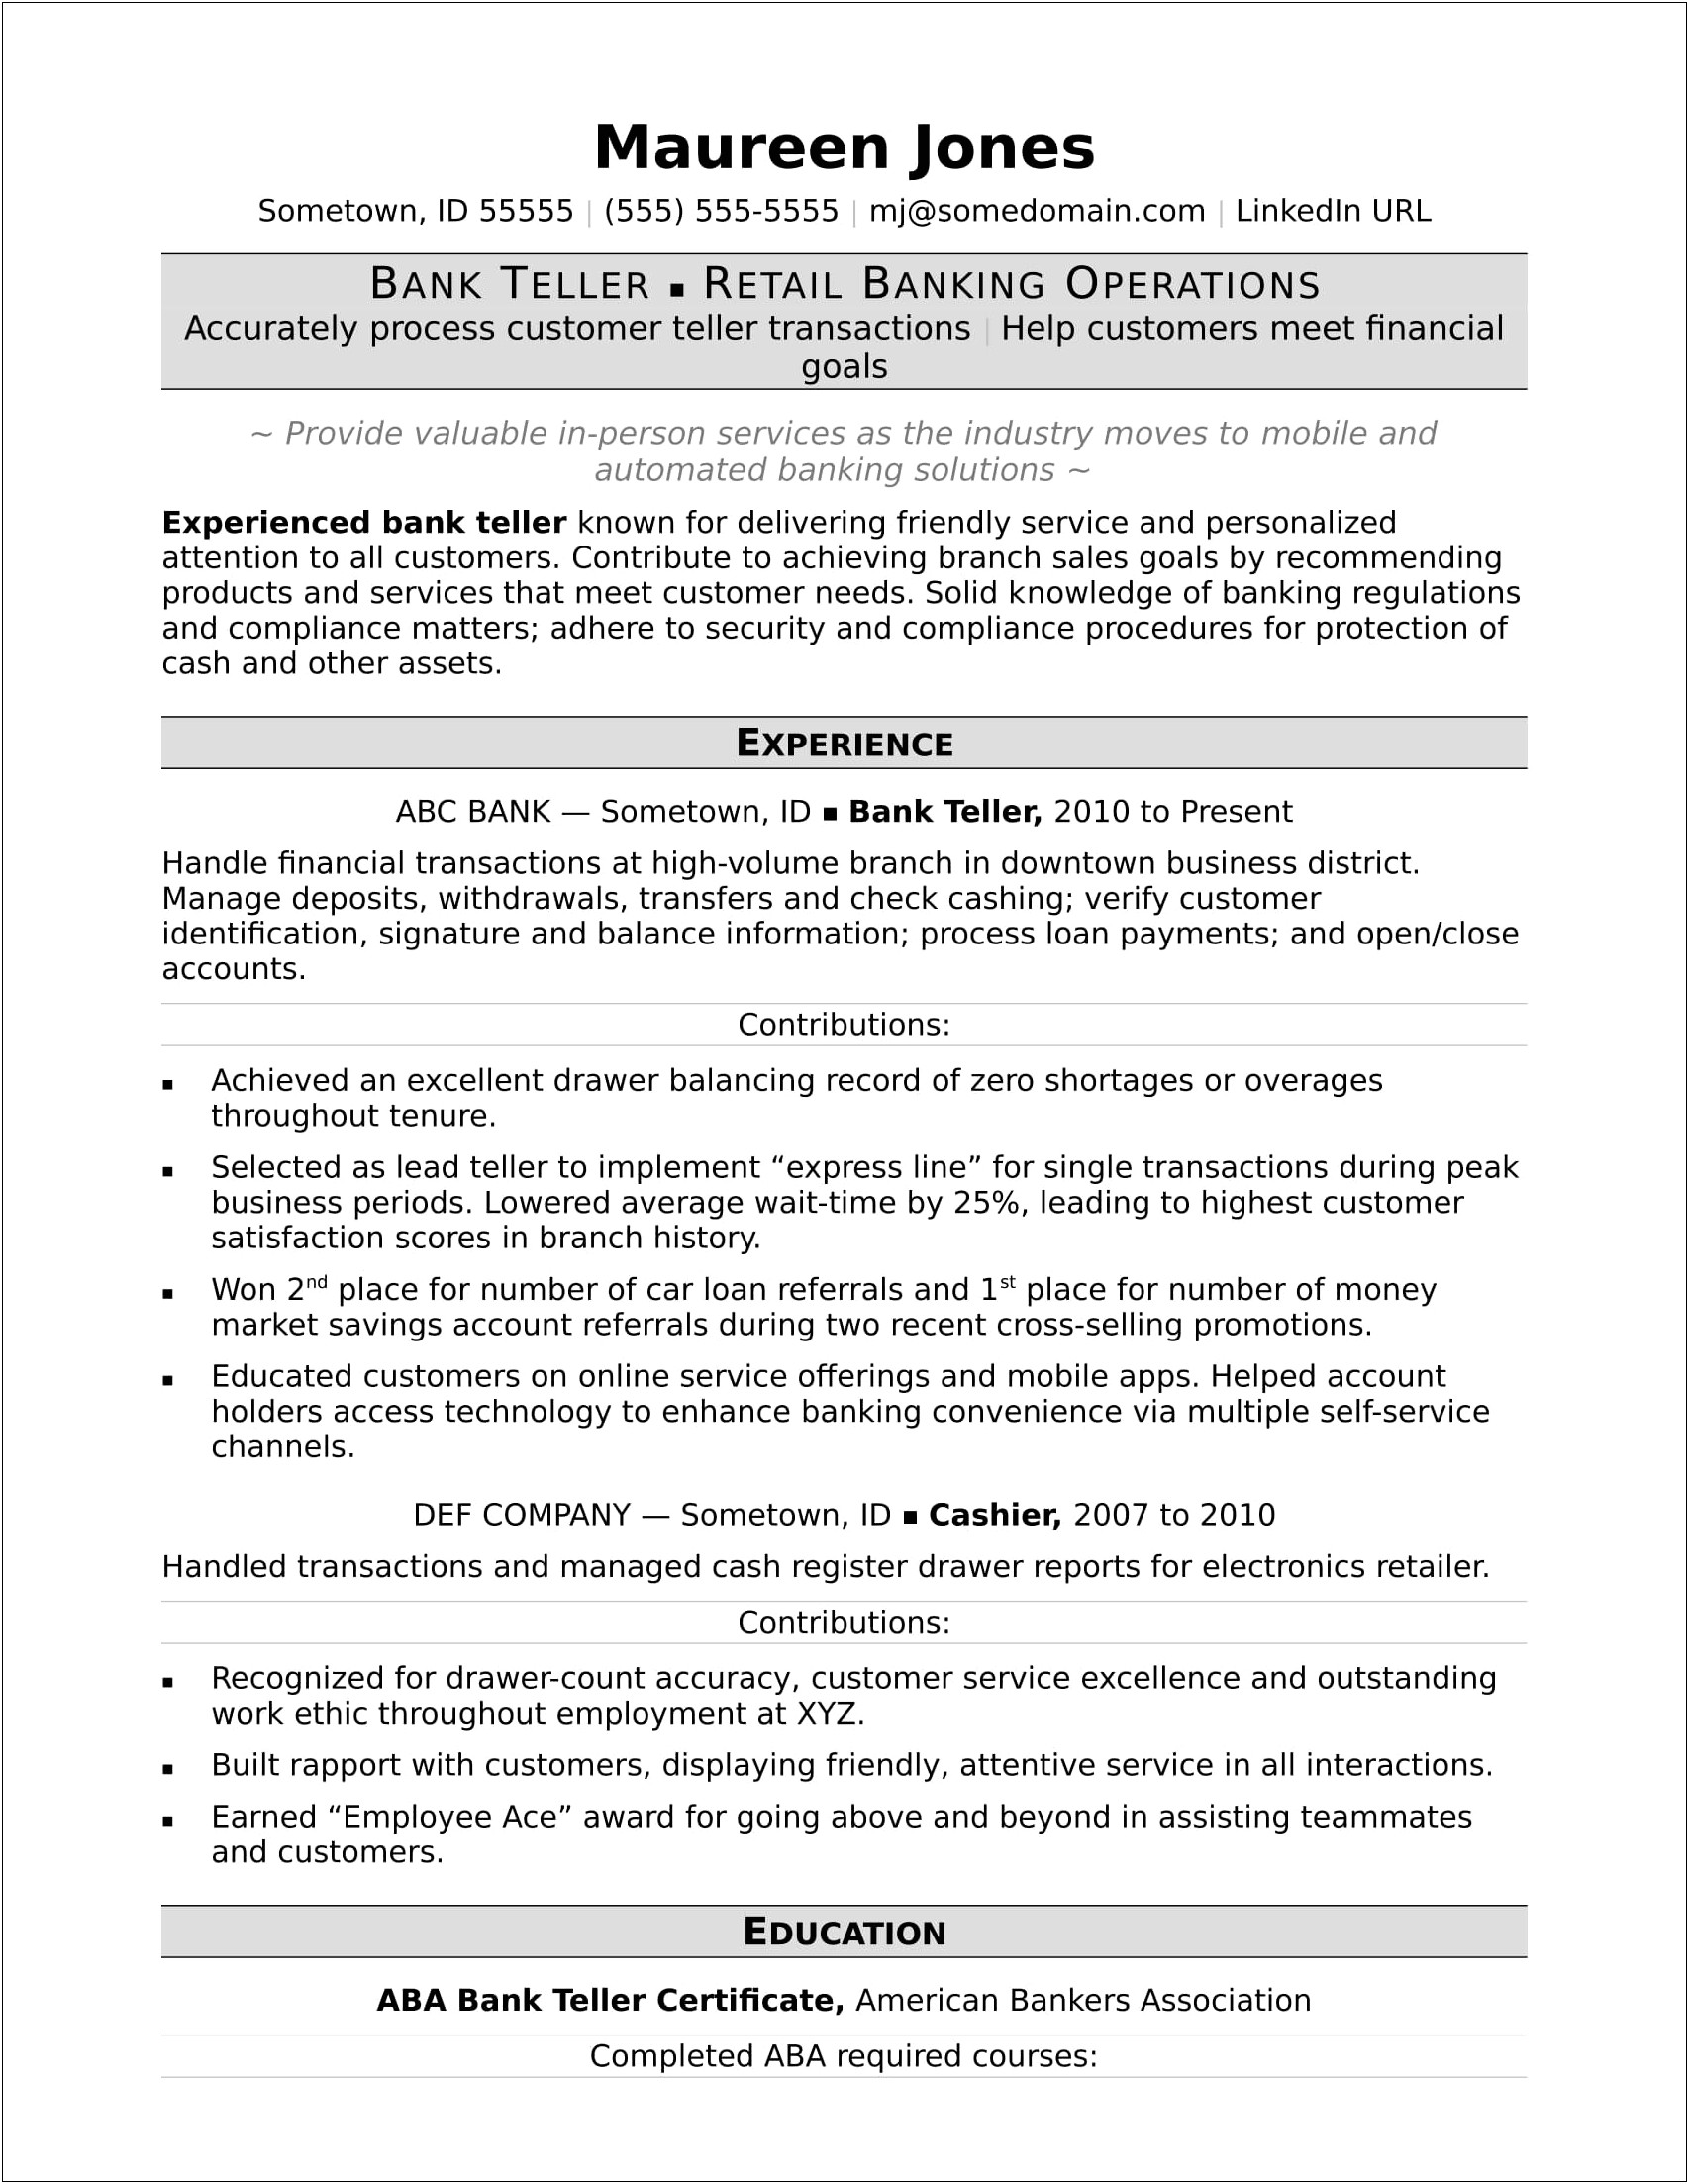 Bank Teller Resume Skills And Abilities